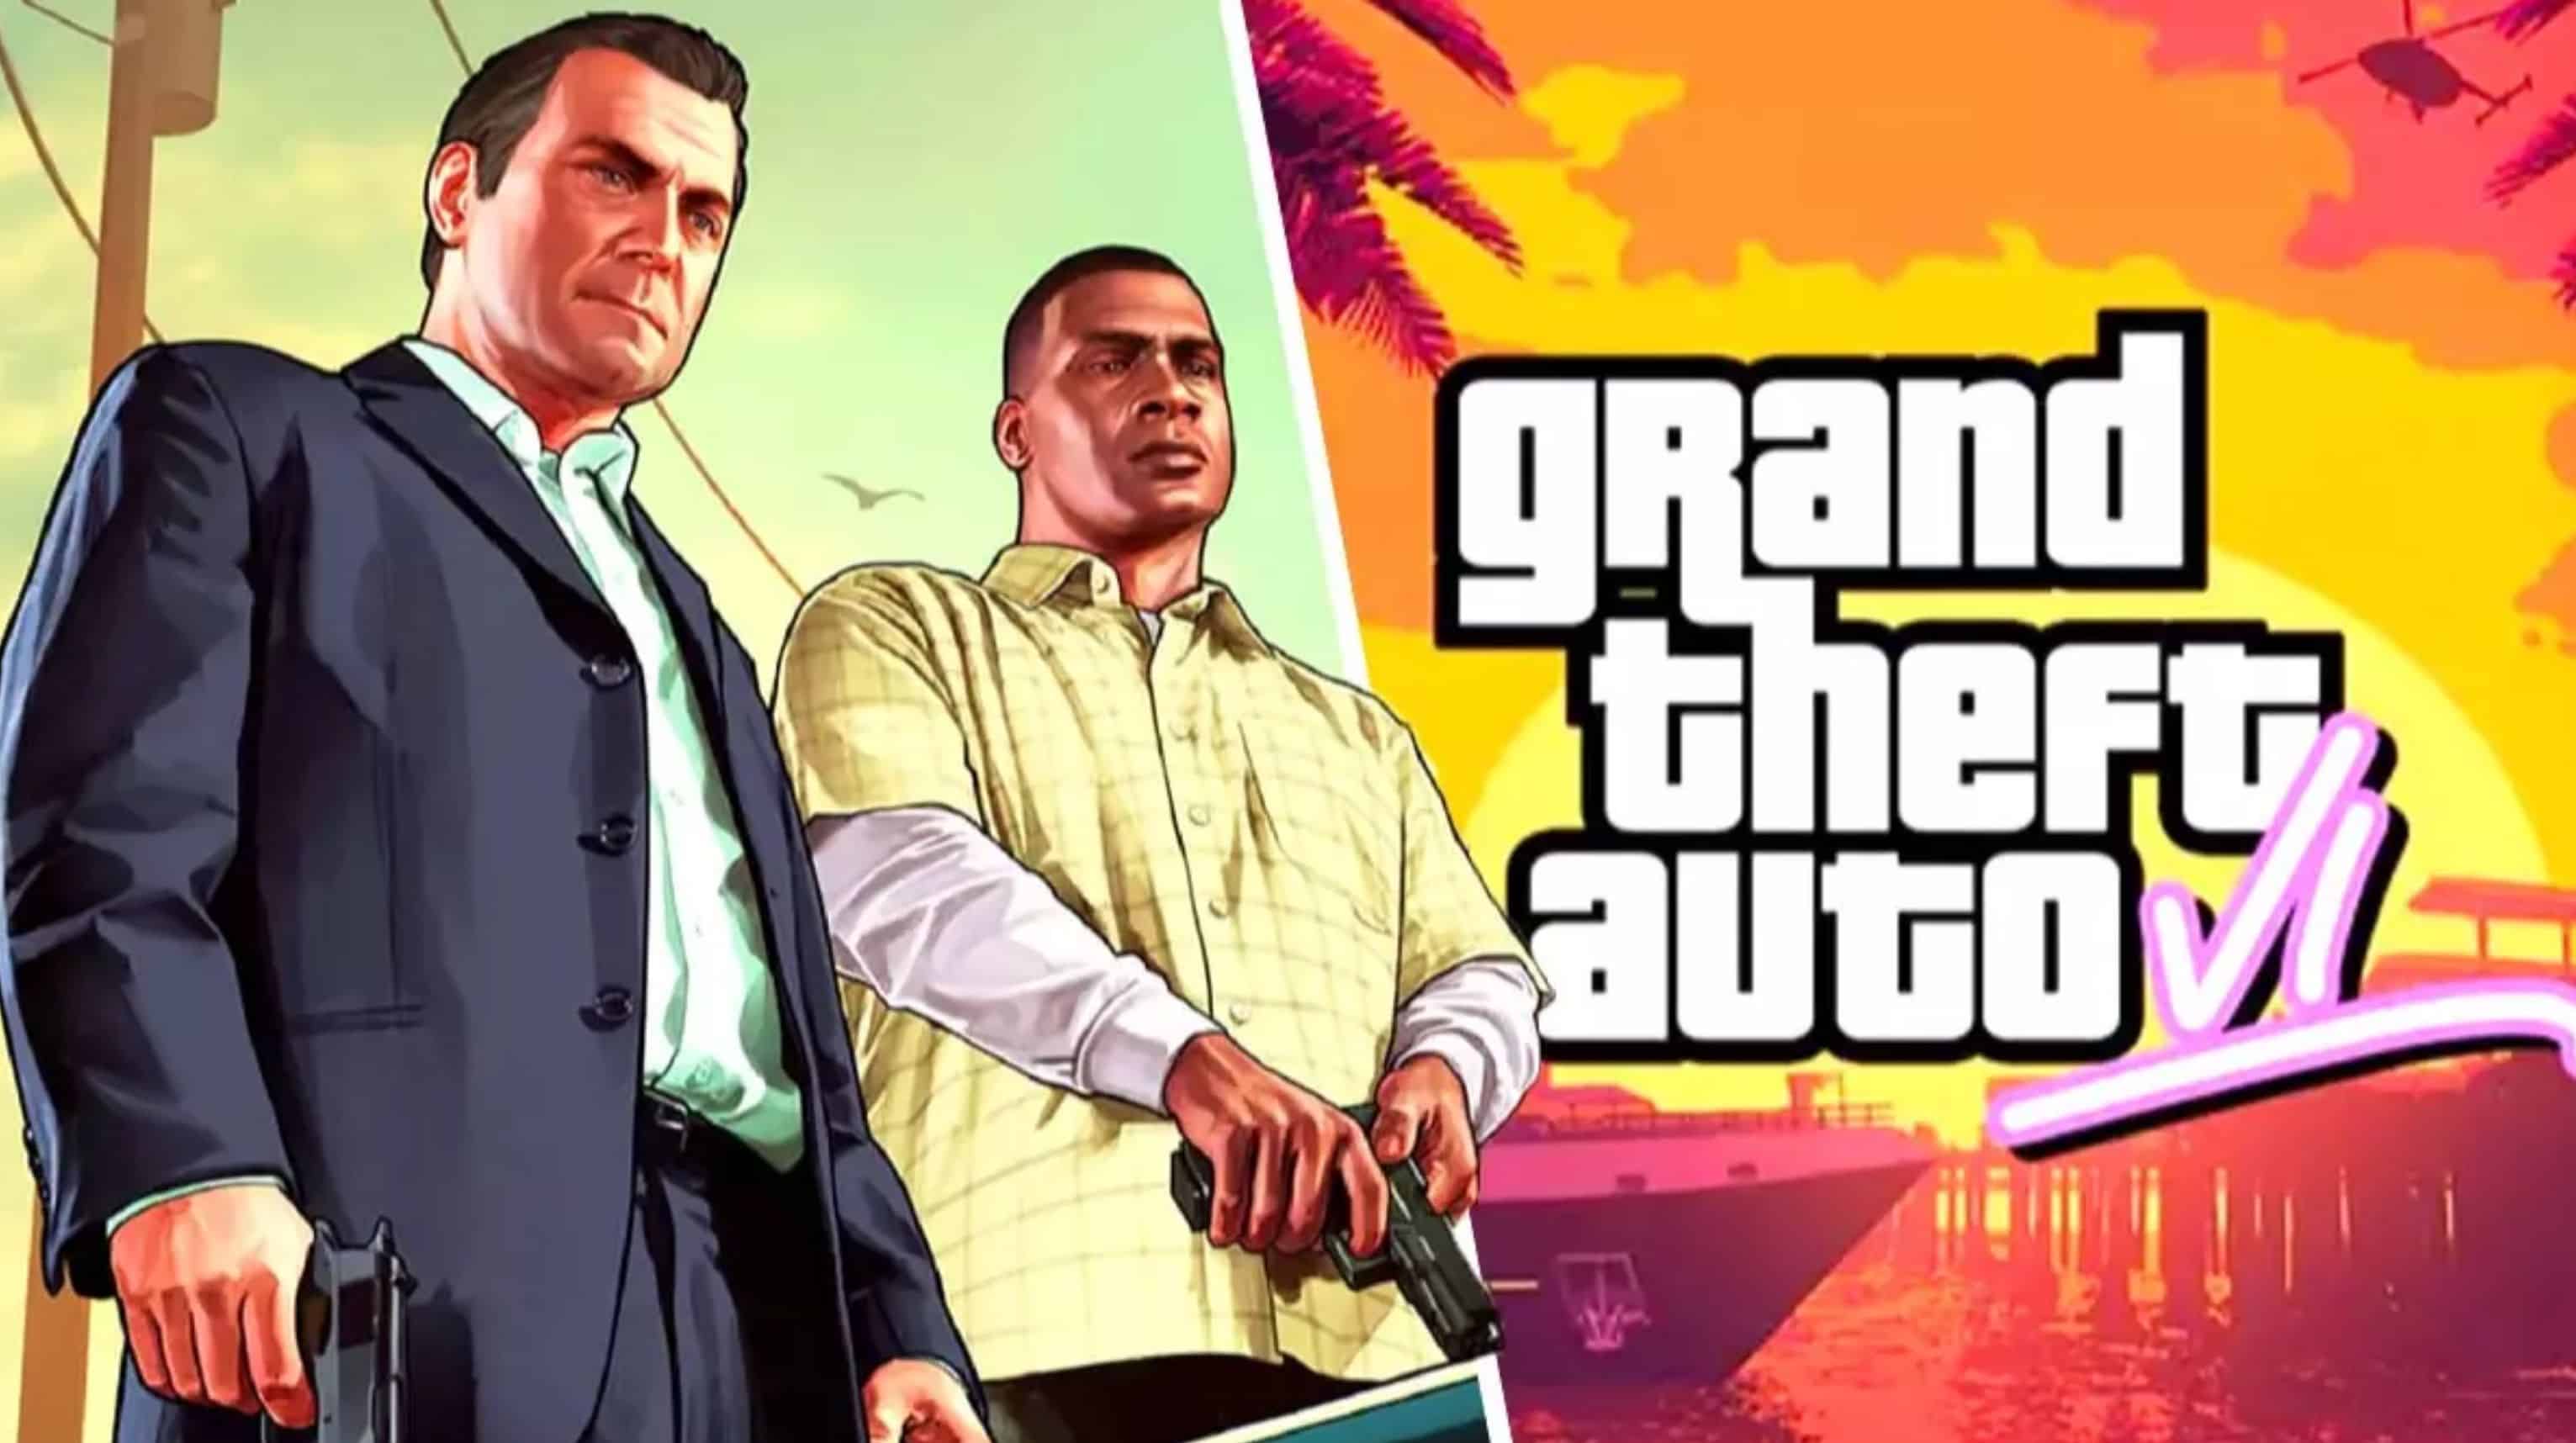 Gta 6 may release in ~October 2023 to ~Febuary 2024 based on the